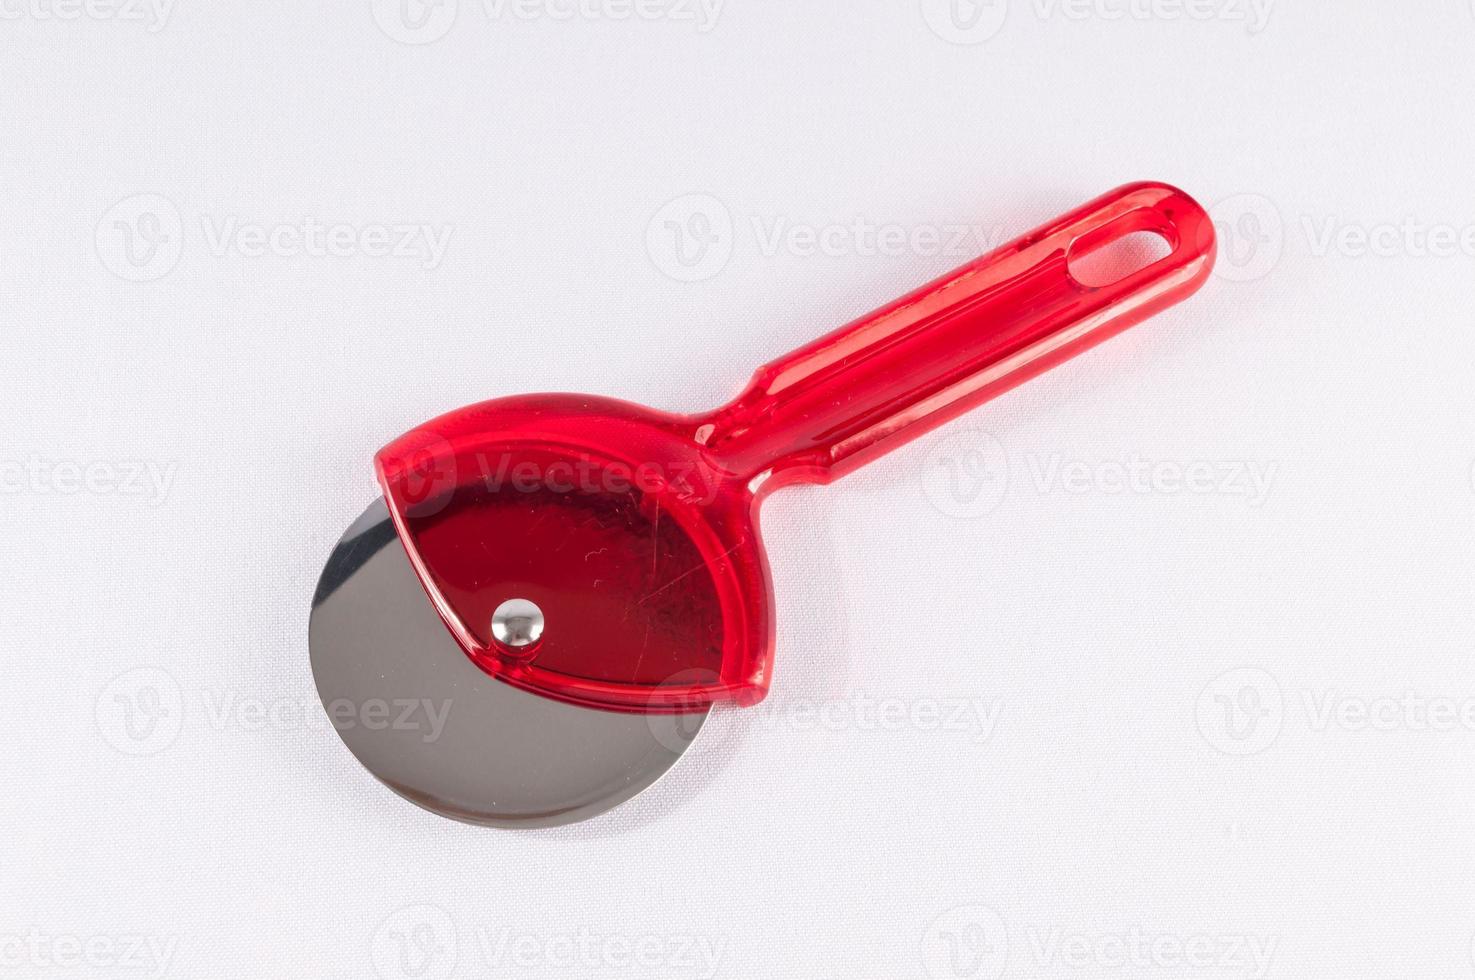 Pizza cutter on white background photo